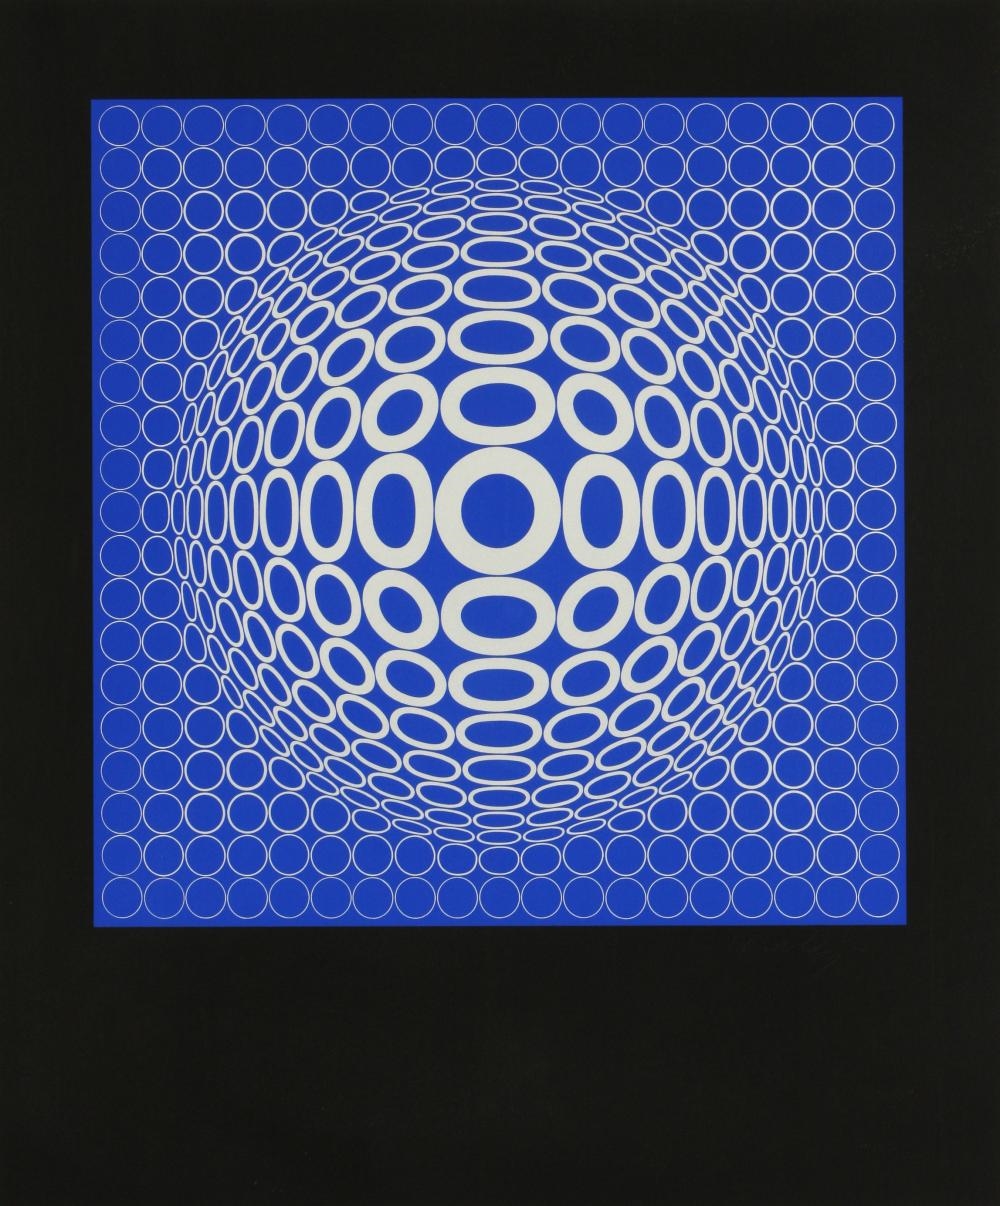 Victor Vasarely, Feny, 1973, Reproduction Print for sale at Pamono